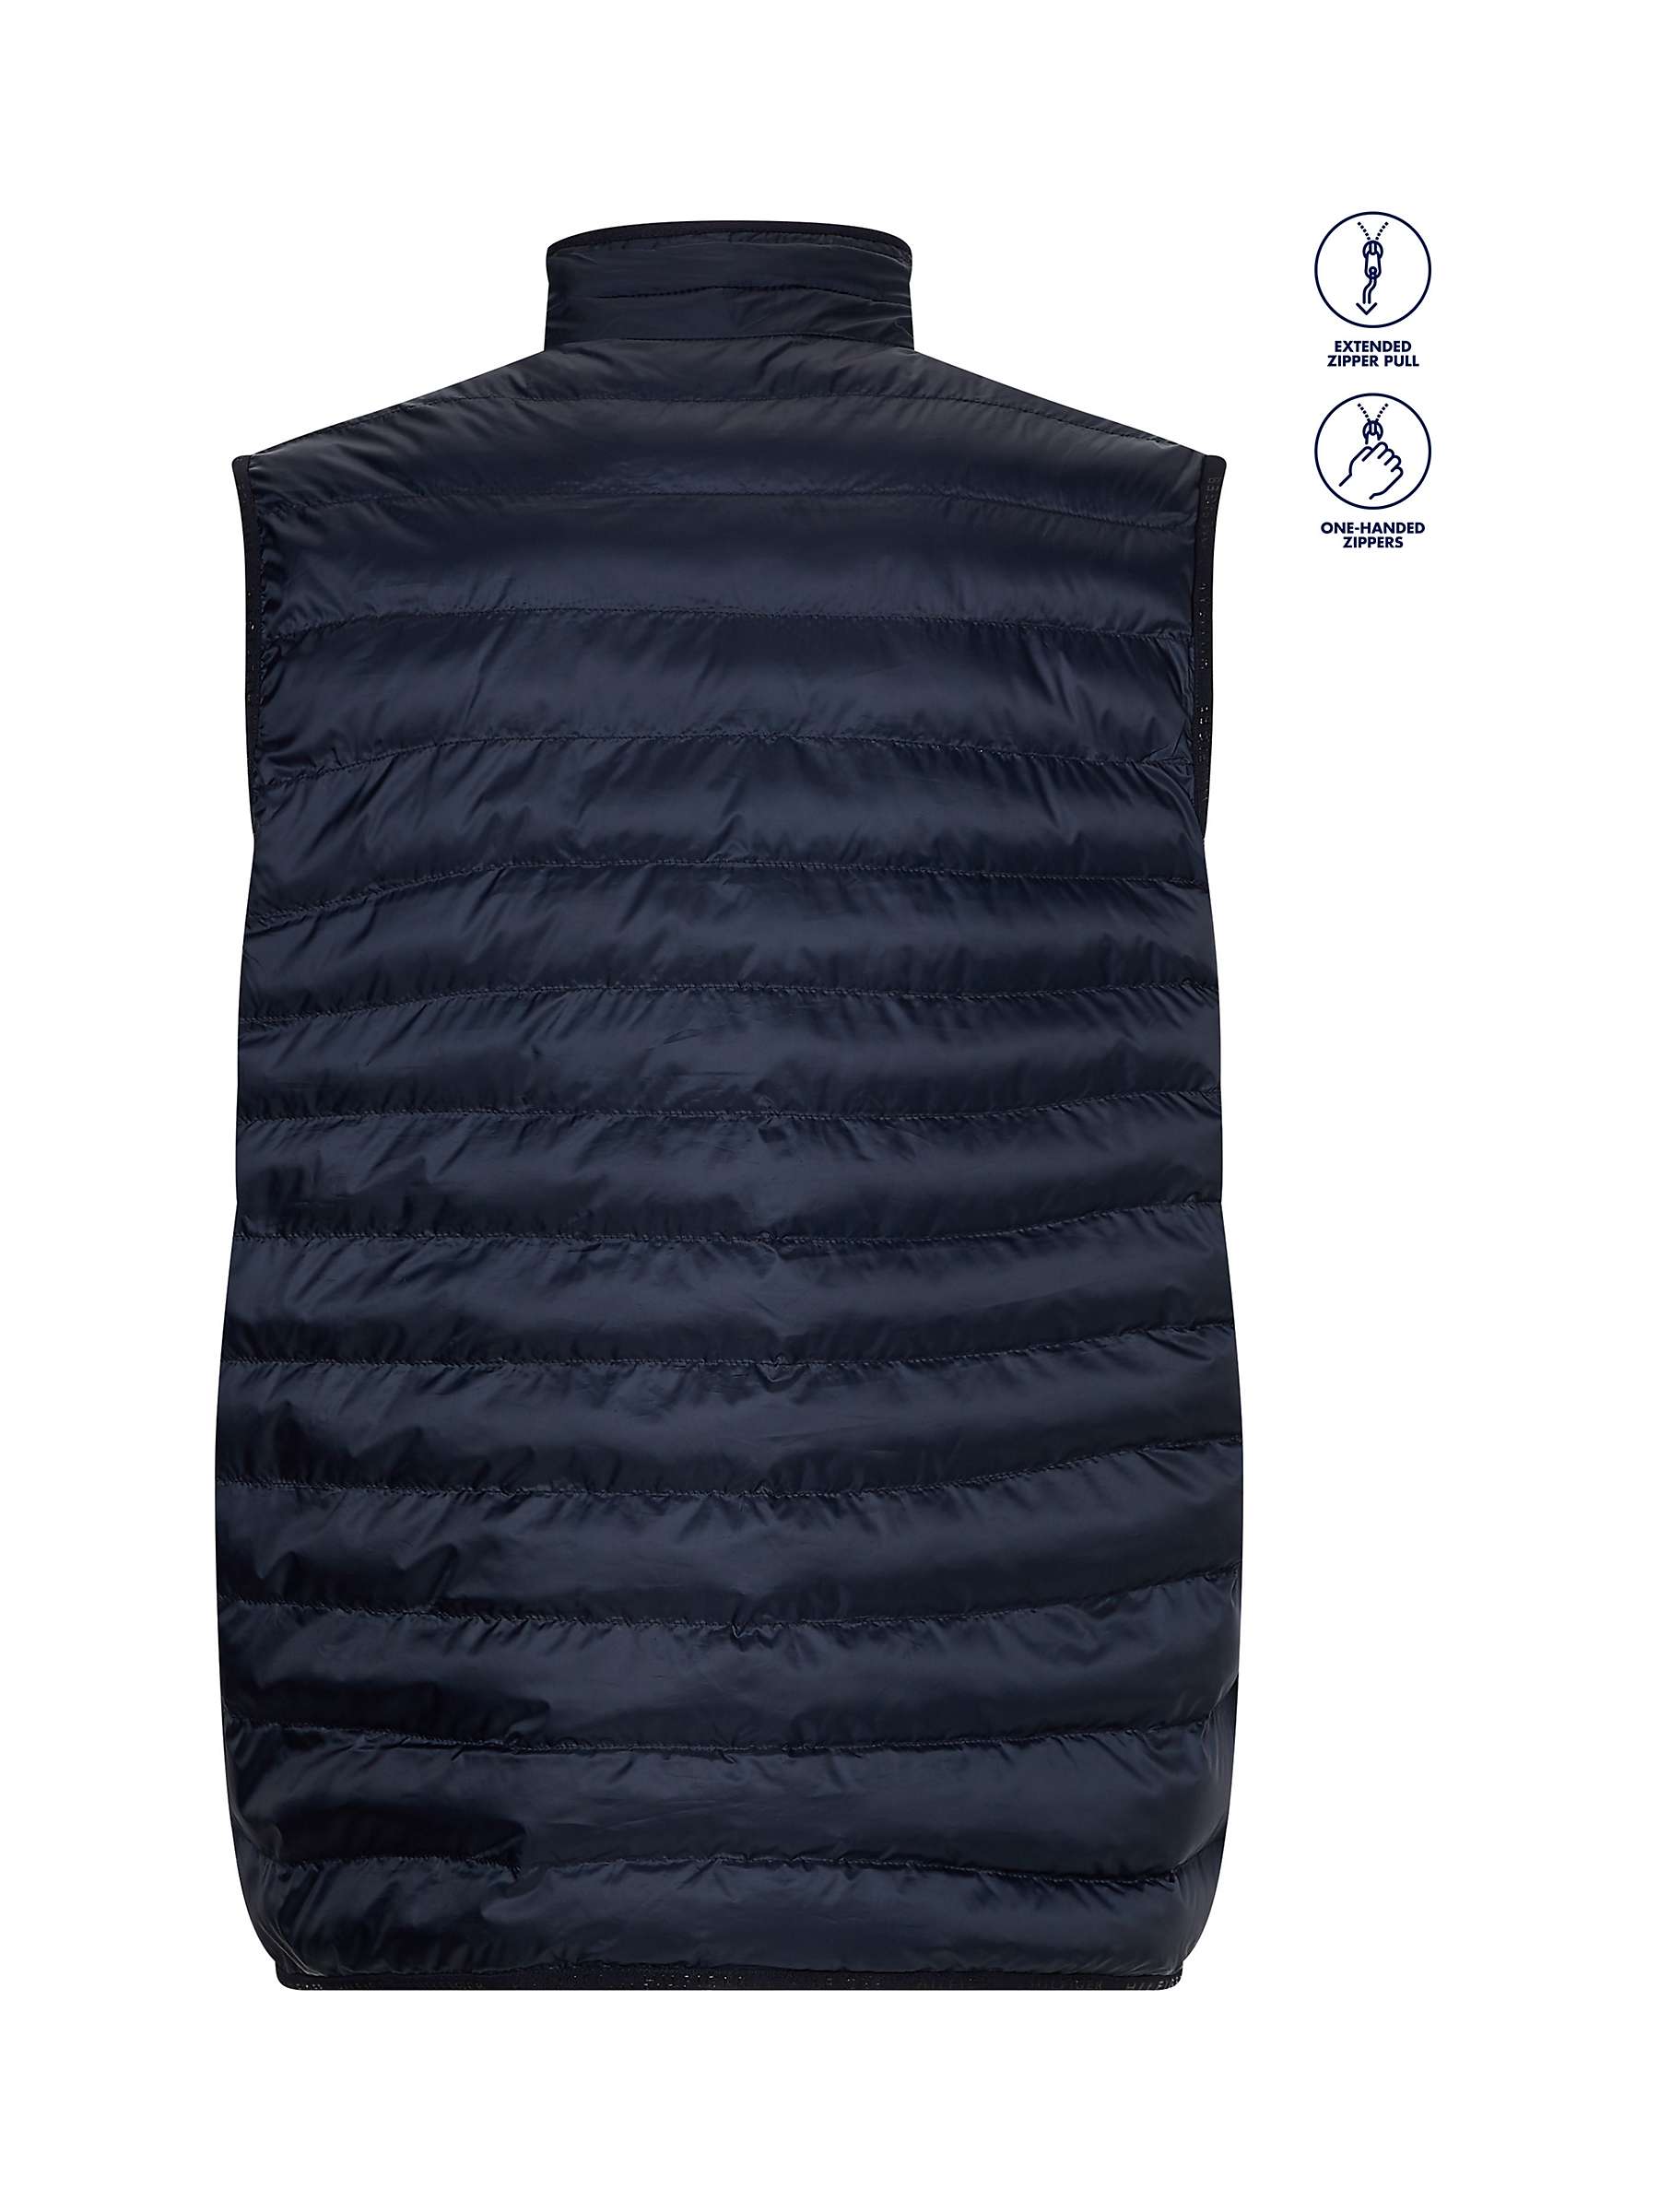 Buy Tommy Hilfiger Adaptive Packable Recycled Gilet, Navy Online at johnlewis.com